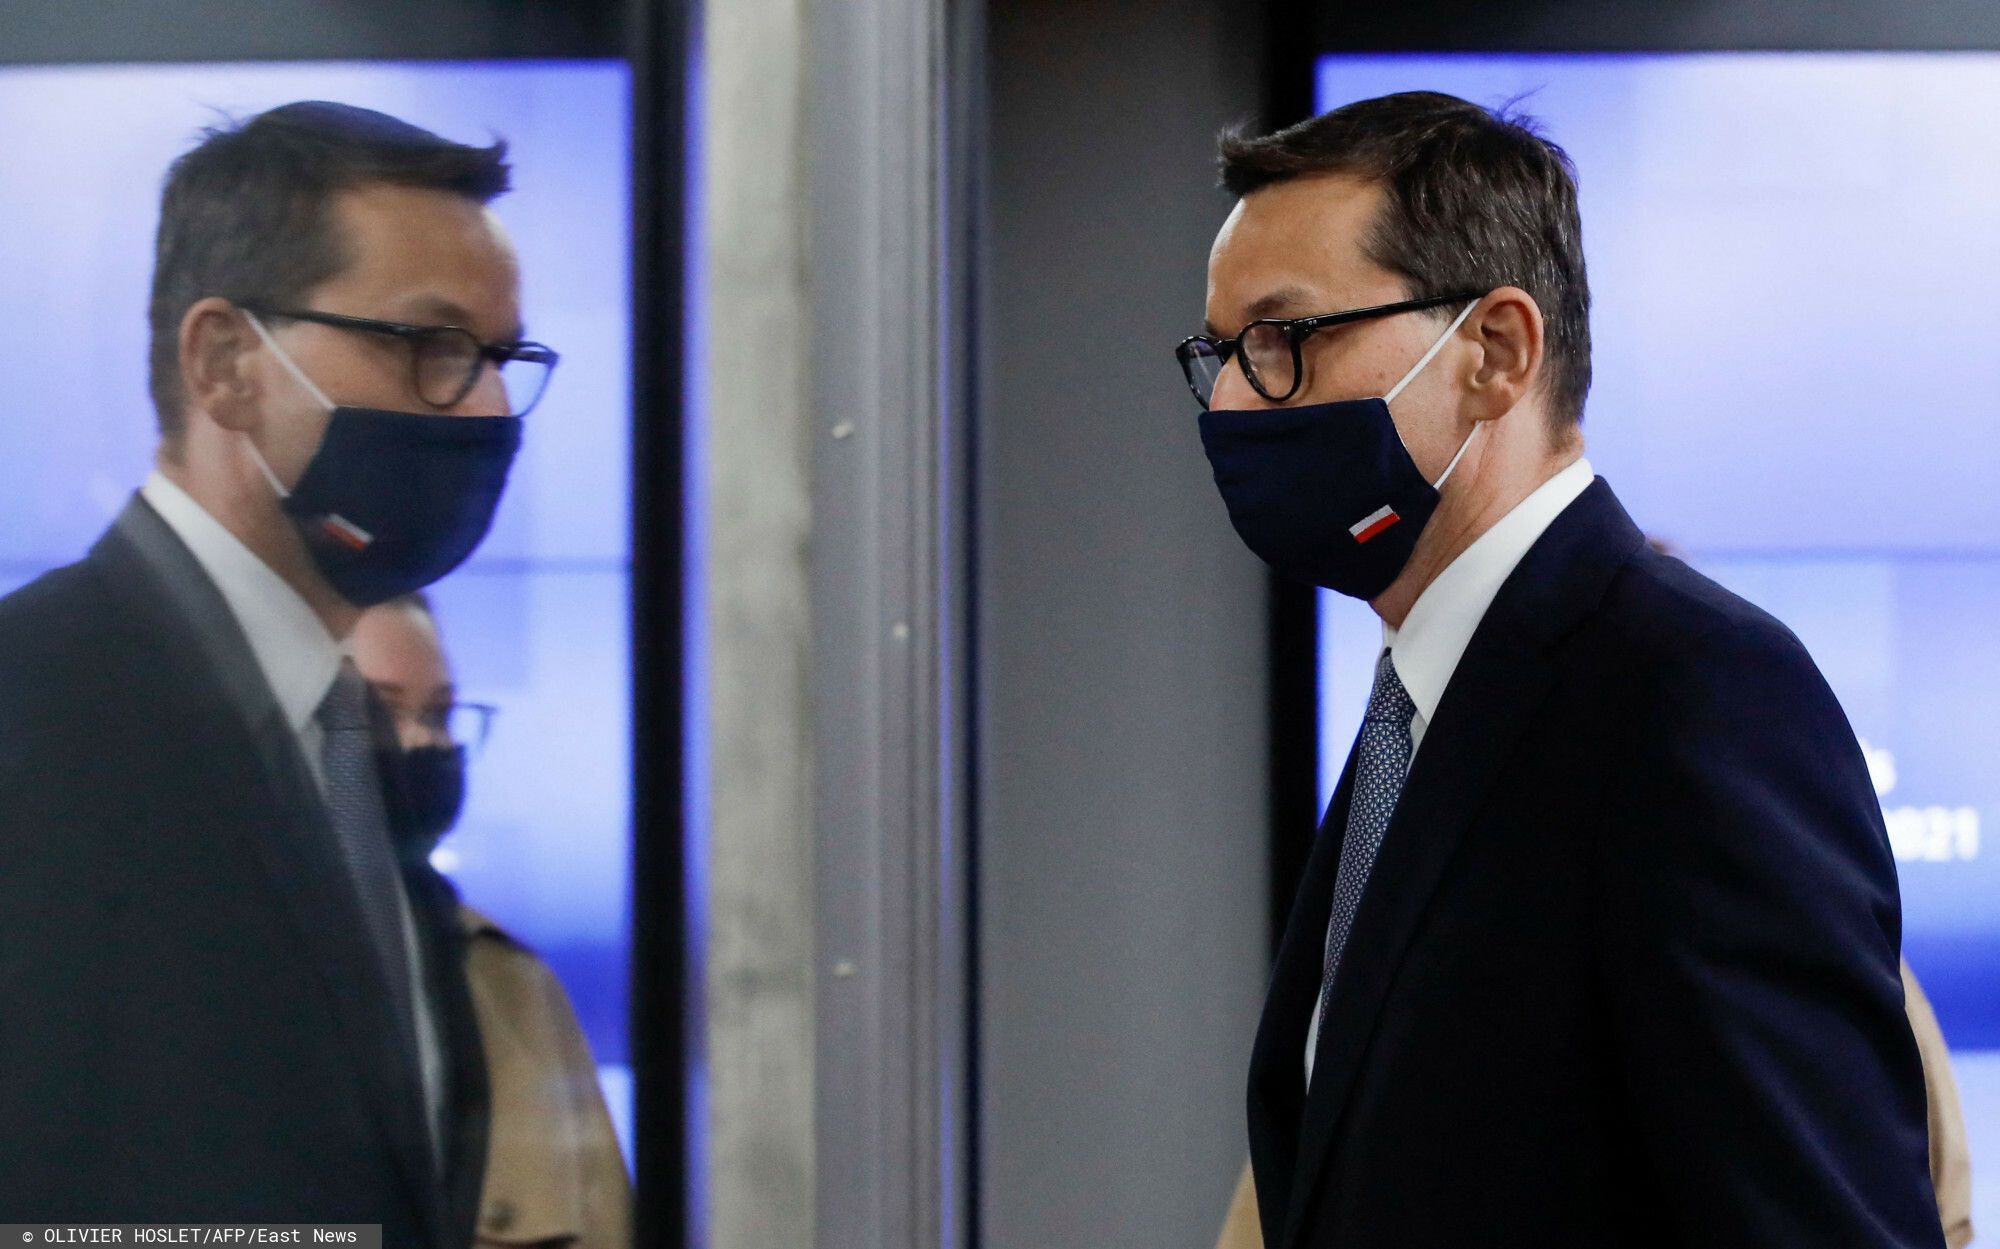 Poland's Prime Minister Mateusz Morawiecki leaves at the end of the first day of the EU summit at the European Council building in Brussels on May 24, 2021. - European Union leaders take part in a two day in-person meeting to discuss the coronavirus pande